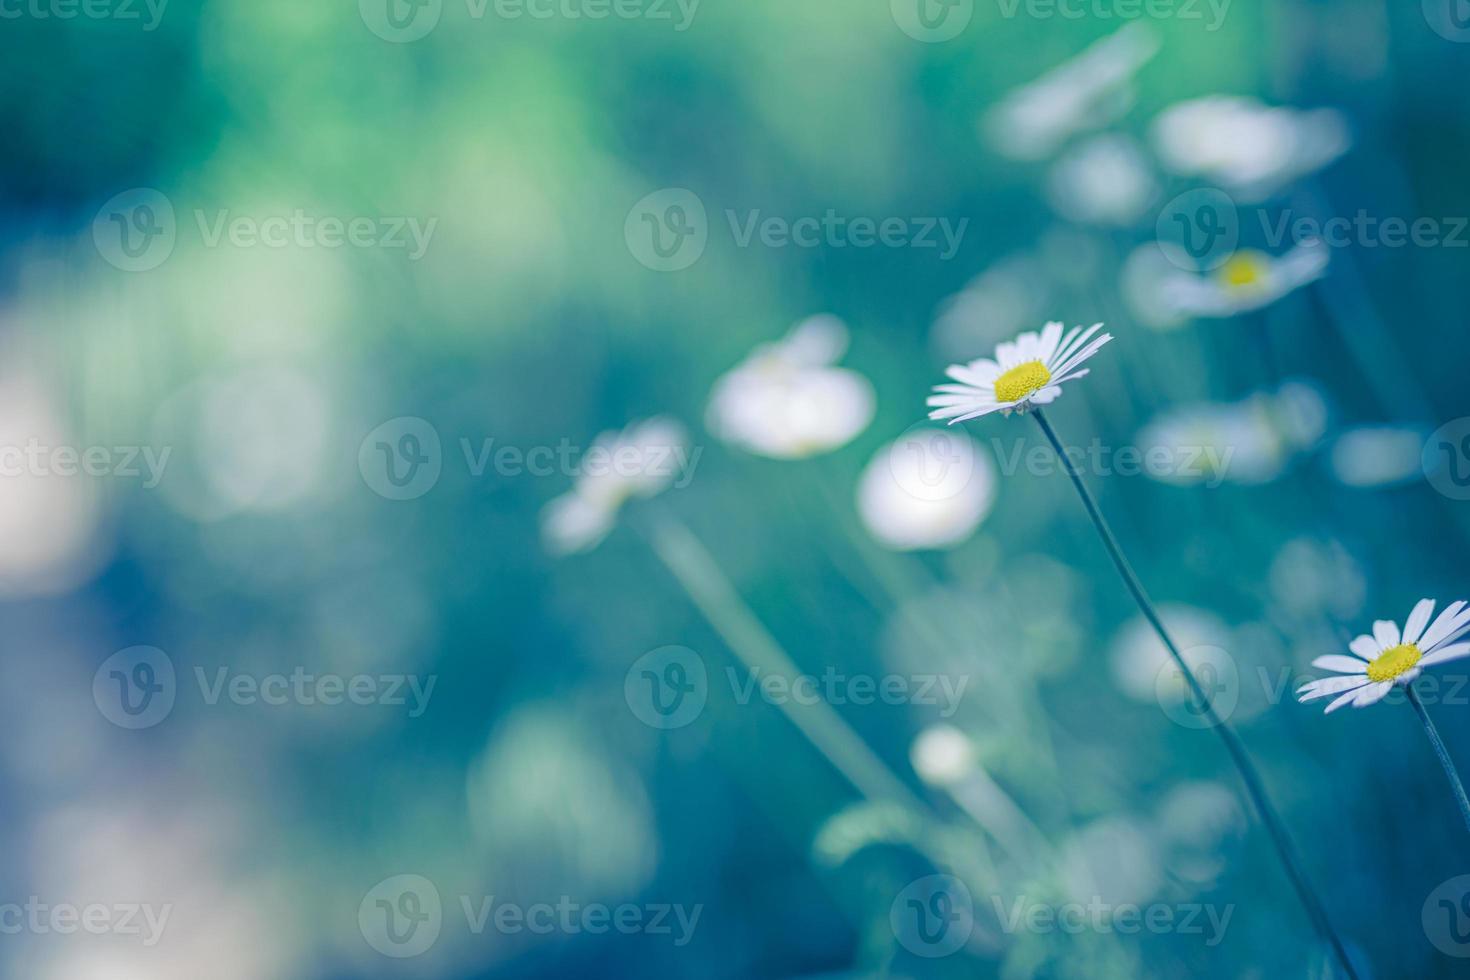 Abstract soft focus sunset field landscape of white flowers daisy grass meadow warm cold toned sunset sunrise time. Tranquil spring summer nature closeup and blurred forest background. Abstract nature photo